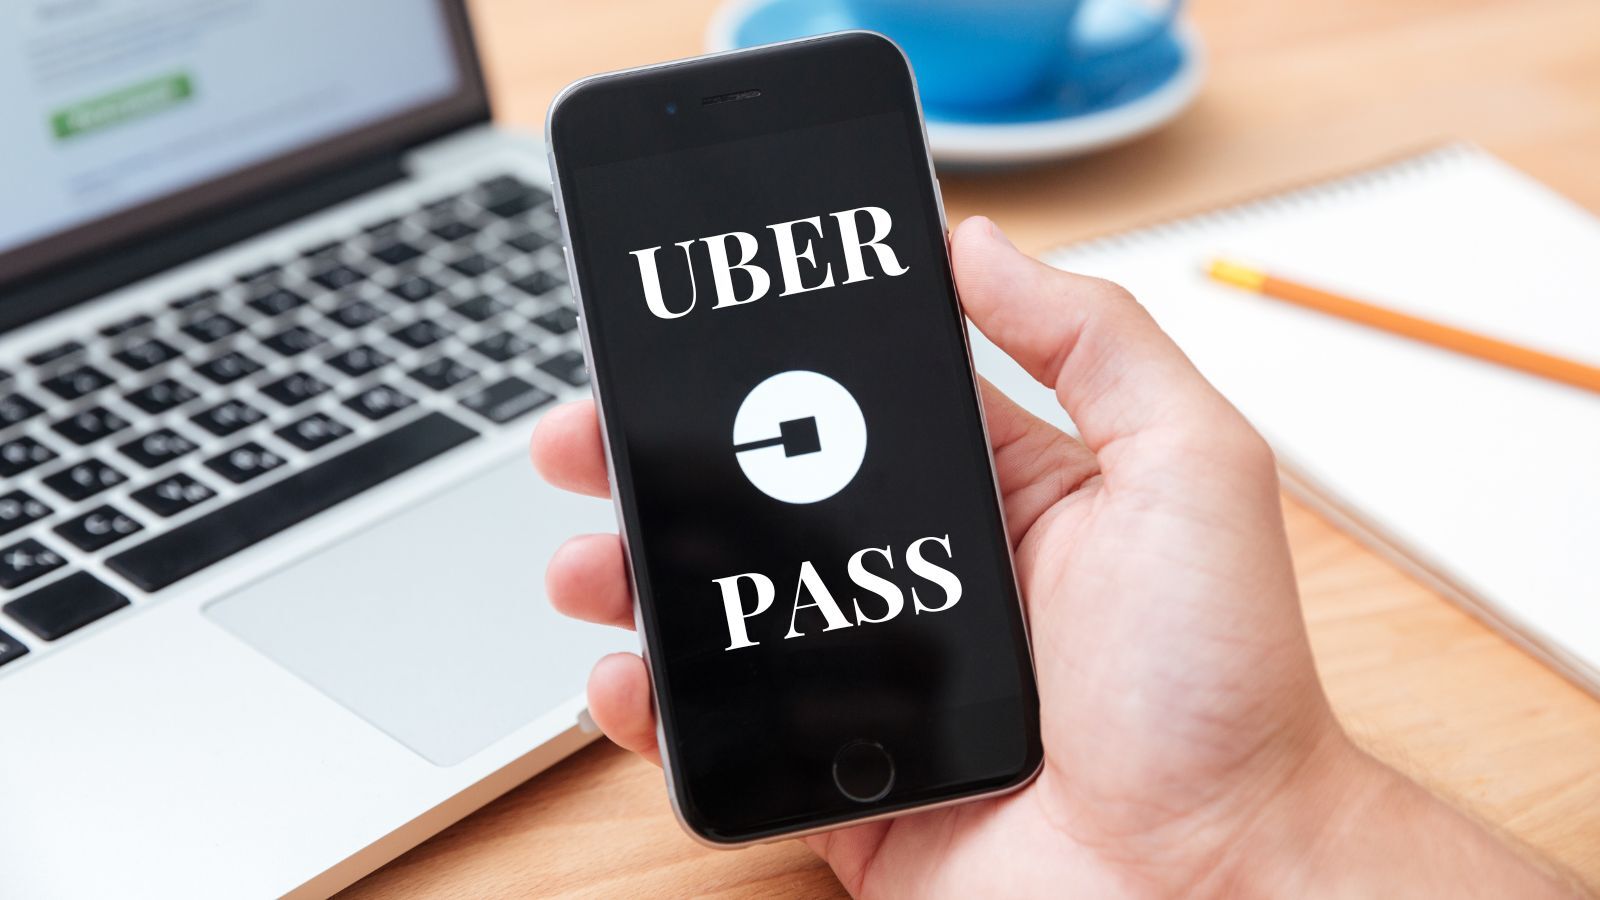 What Is Uber Pass? (Benefits, Operations, and Charges)